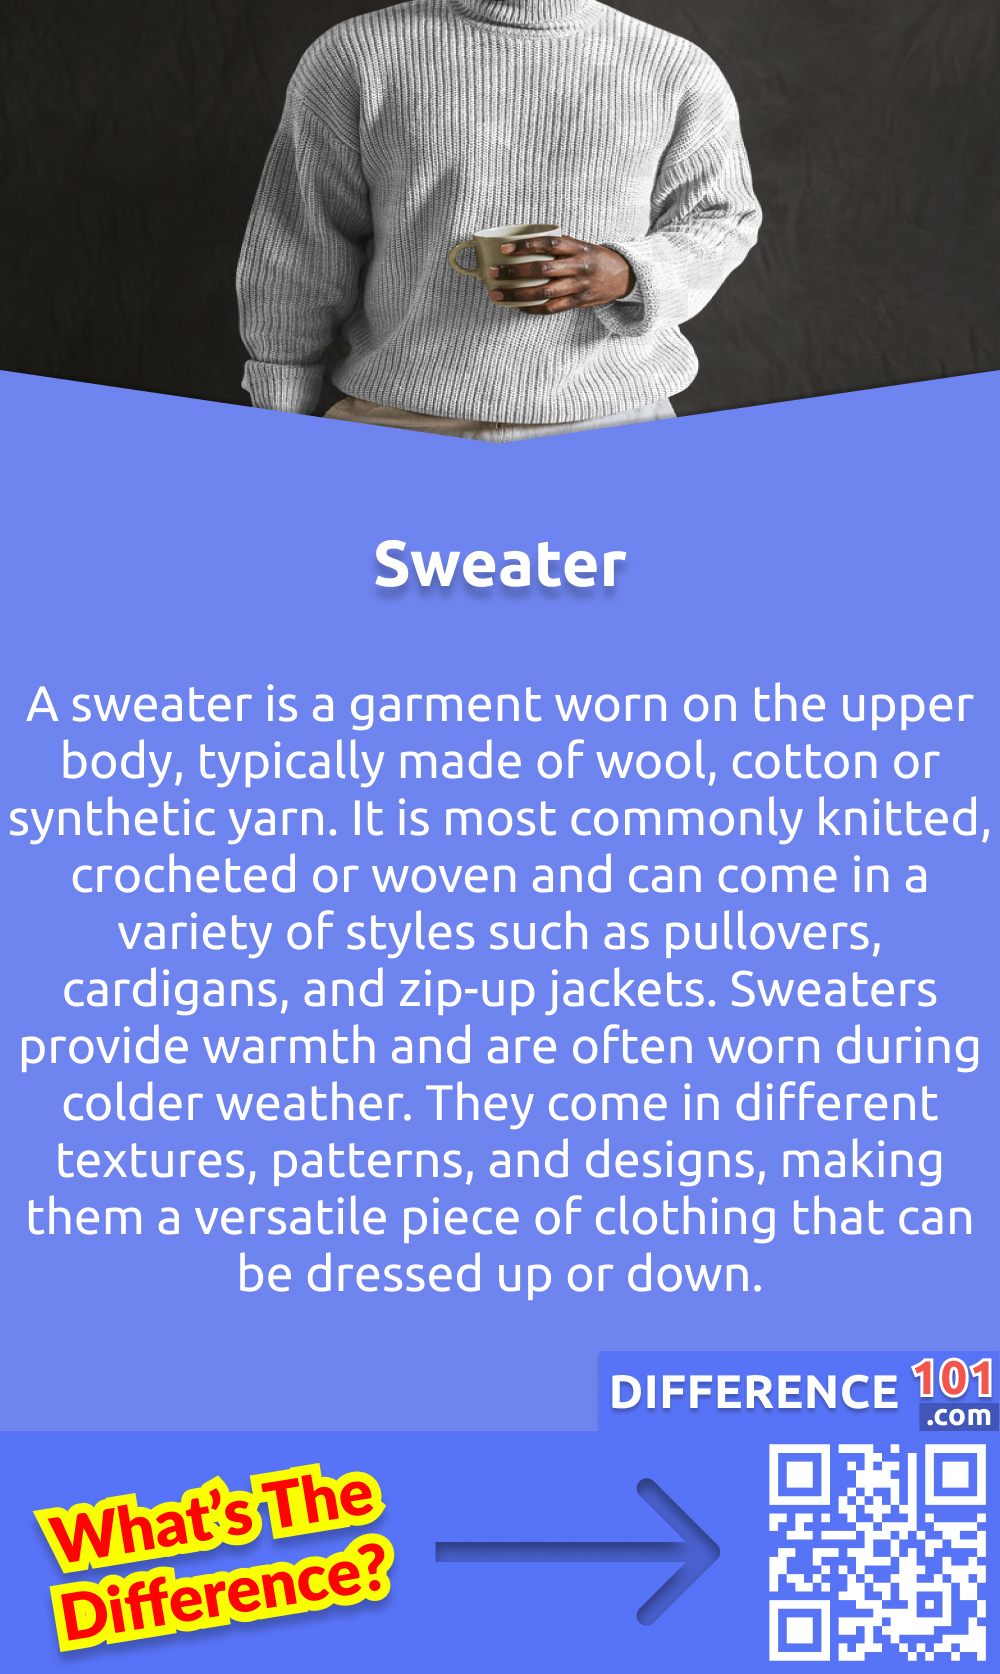 What Is Sweater? A sweater is a garment worn on the upper body, typically made of wool, cotton or synthetic yarn. It is most commonly knitted, crocheted or woven and can come in a variety of styles such as pullovers, cardigans, and zip-up jackets. Sweaters provide warmth and are often worn during colder weather. They come in different textures, patterns, and designs, making them a versatile piece of clothing that can be dressed up or down. Sweaters are widely used in fashion, and many designers incorporate them into their collections. So whether for fashion, warmth or comfort, a sweater is a must-have in anyone's wardrobe.